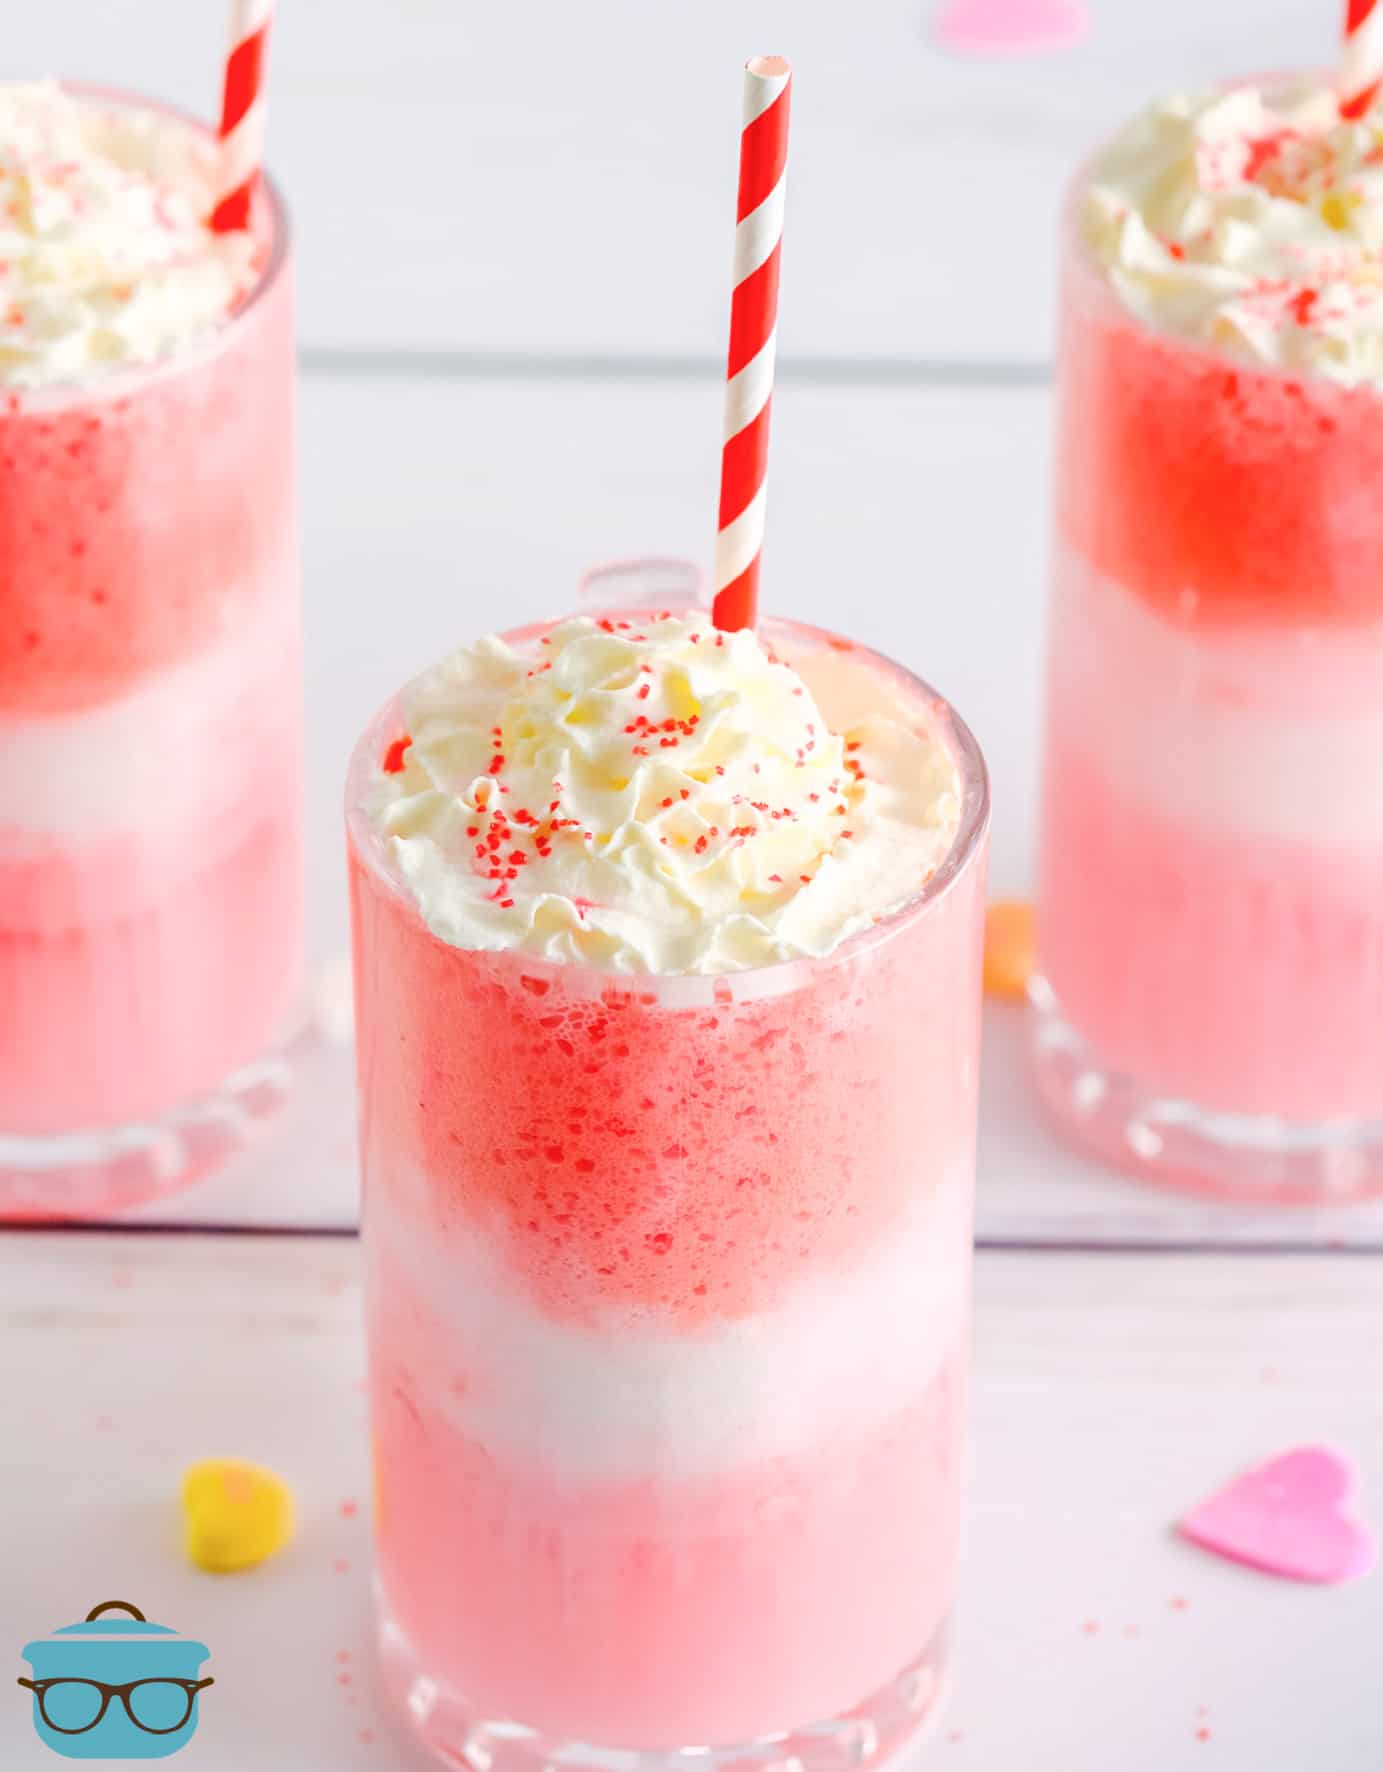 Close up of Strawberry Cream Floats in glass topped with whipped cream, sprinkles and a straw.